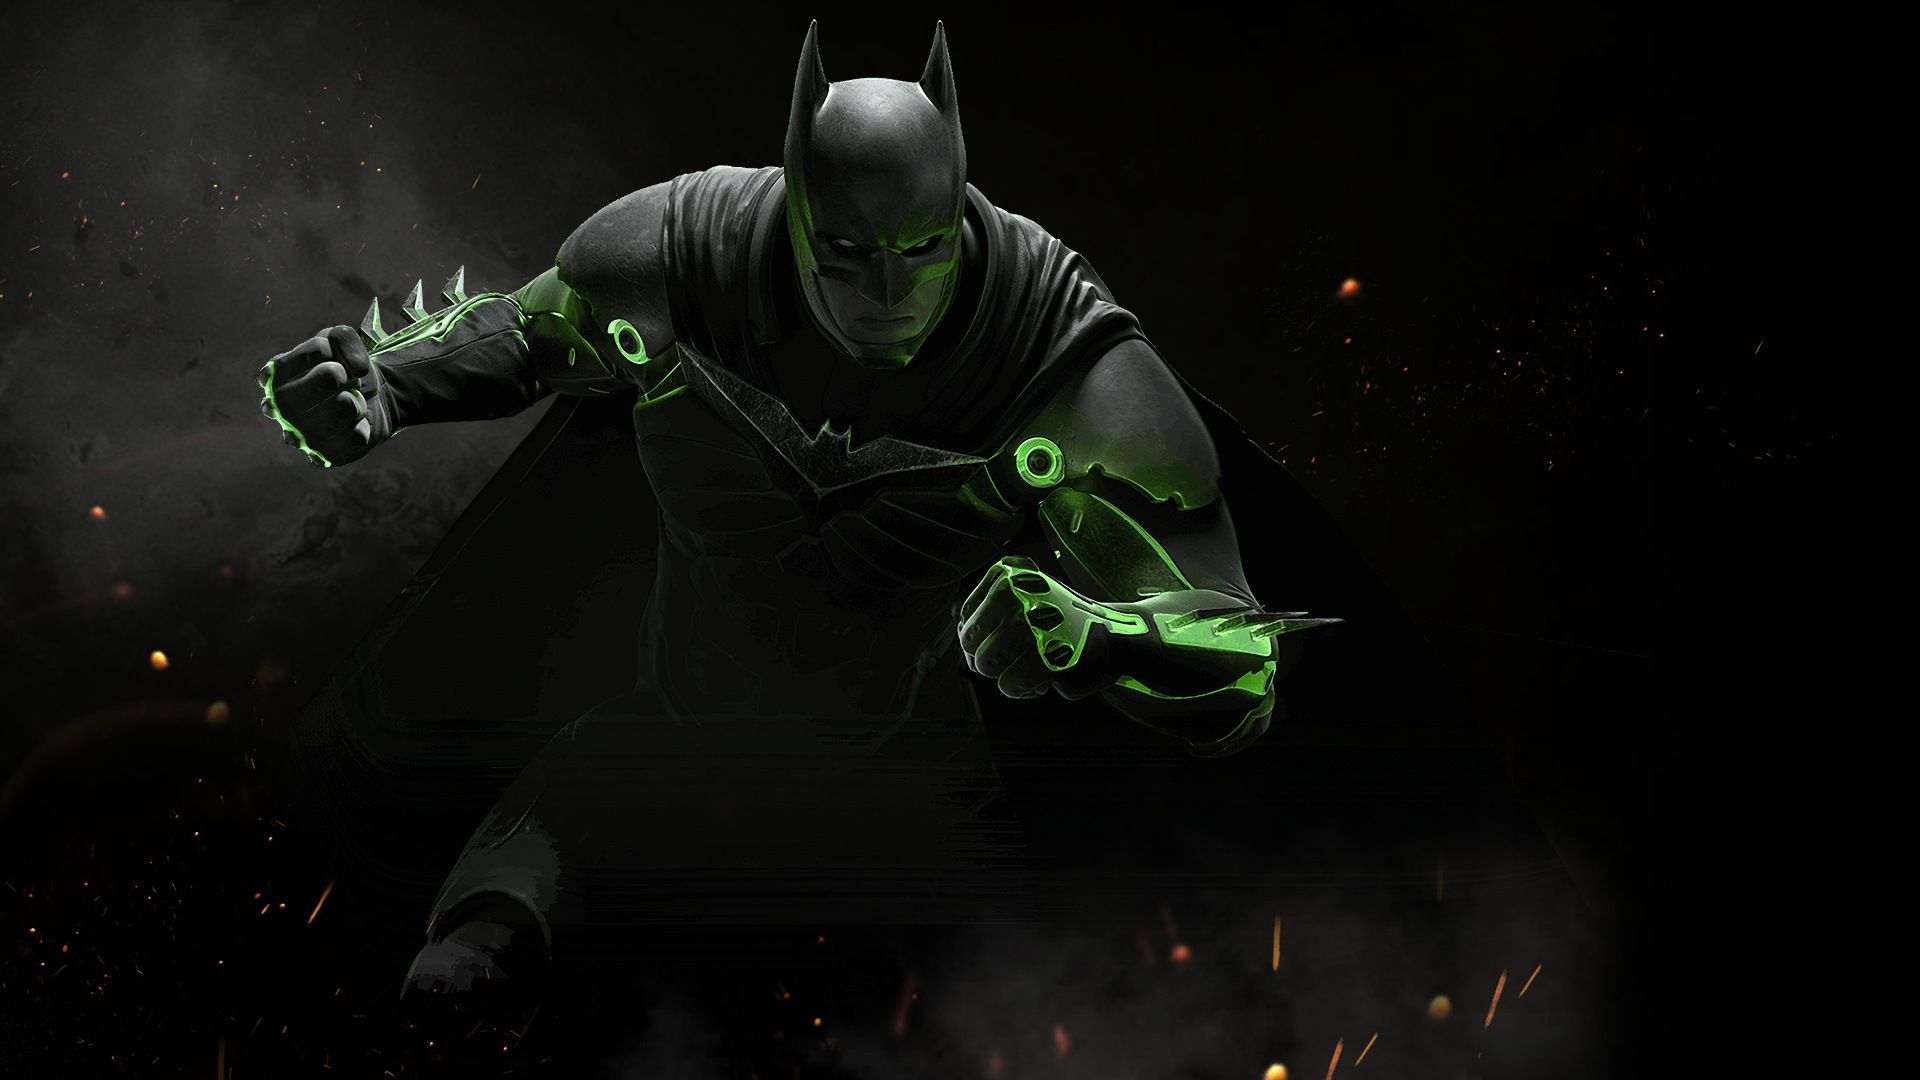 I was looking for desktop wallpaper and found this. Injustice 2 Kryptonite suit doesn't get enough love